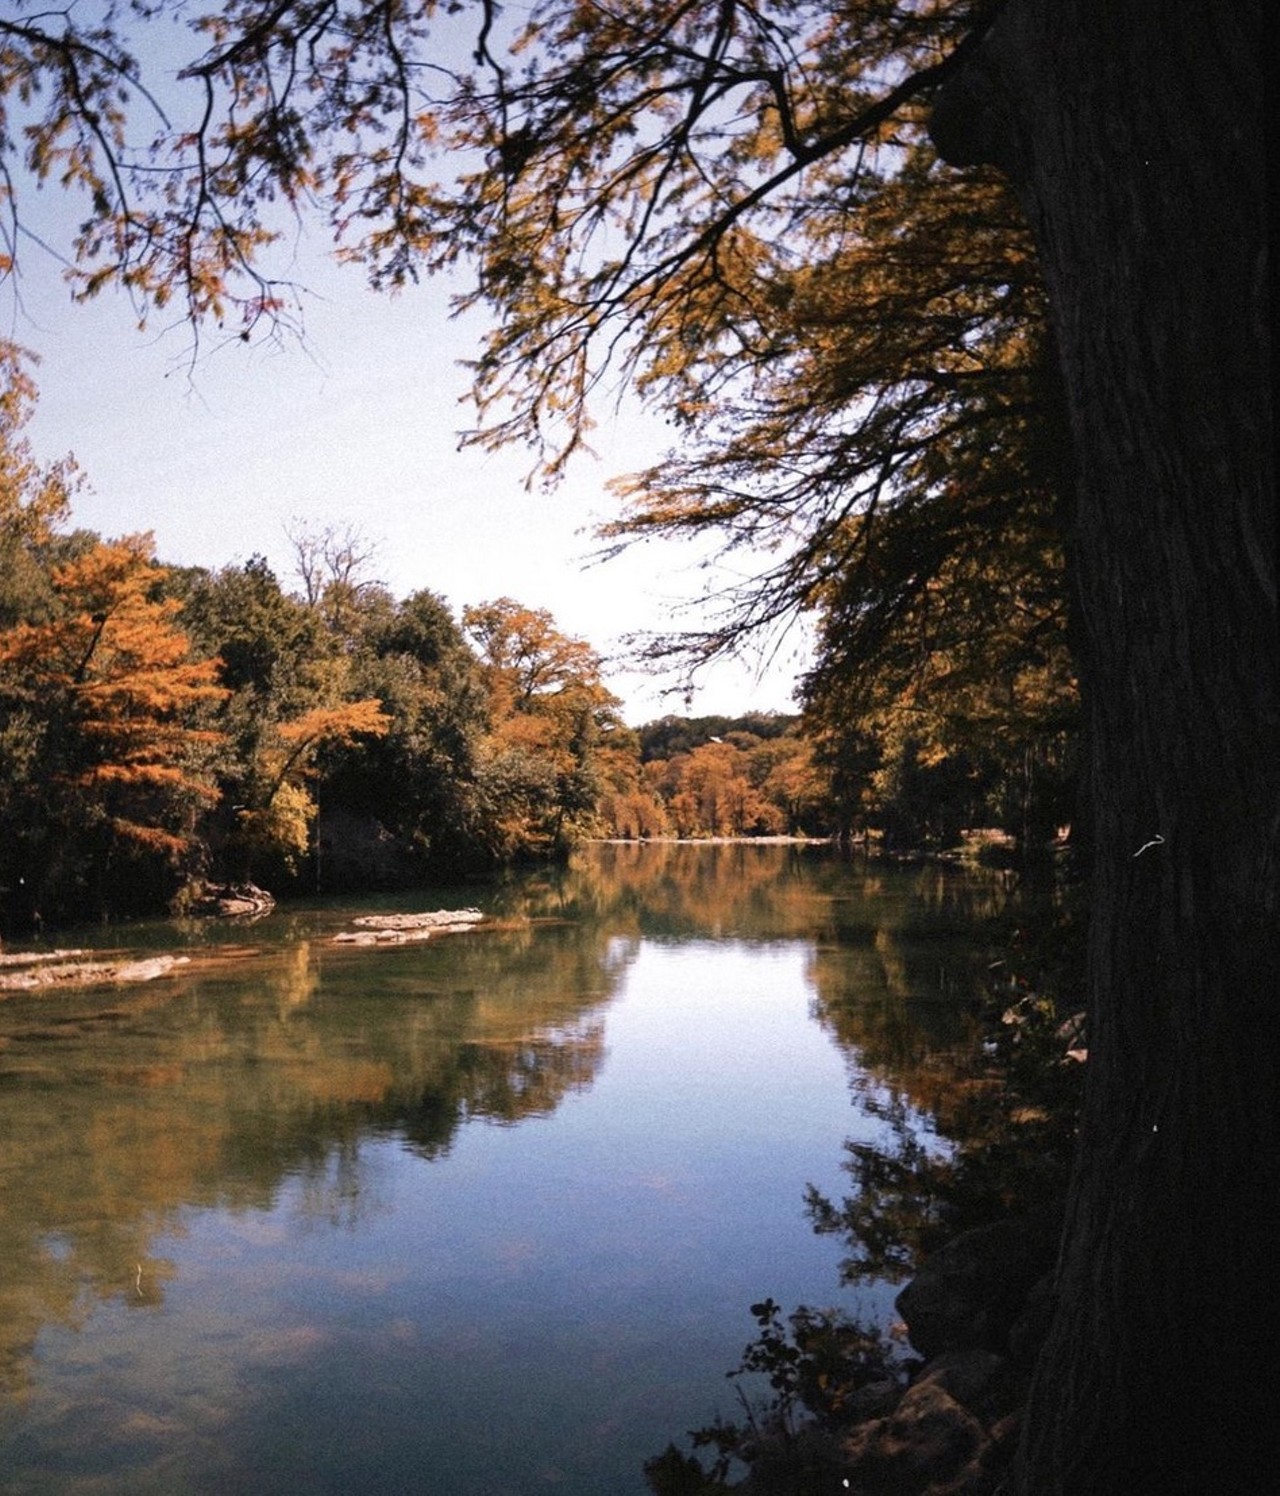 Guadalupe River State Park
3350 Park Road 31, Spring Branch, (830) 438-2656, tpwd.texas.gov
A quick drive away and you’ll find yourself in Guadalupe River State Park. Though popular for its swimming hole, you can visit for its awesome trails – 13 miles worth to be exact. Throughout the trails, both long and short, you can score some awesome views that will have you in awe.
Photo via Instagram / roundhouse.hash